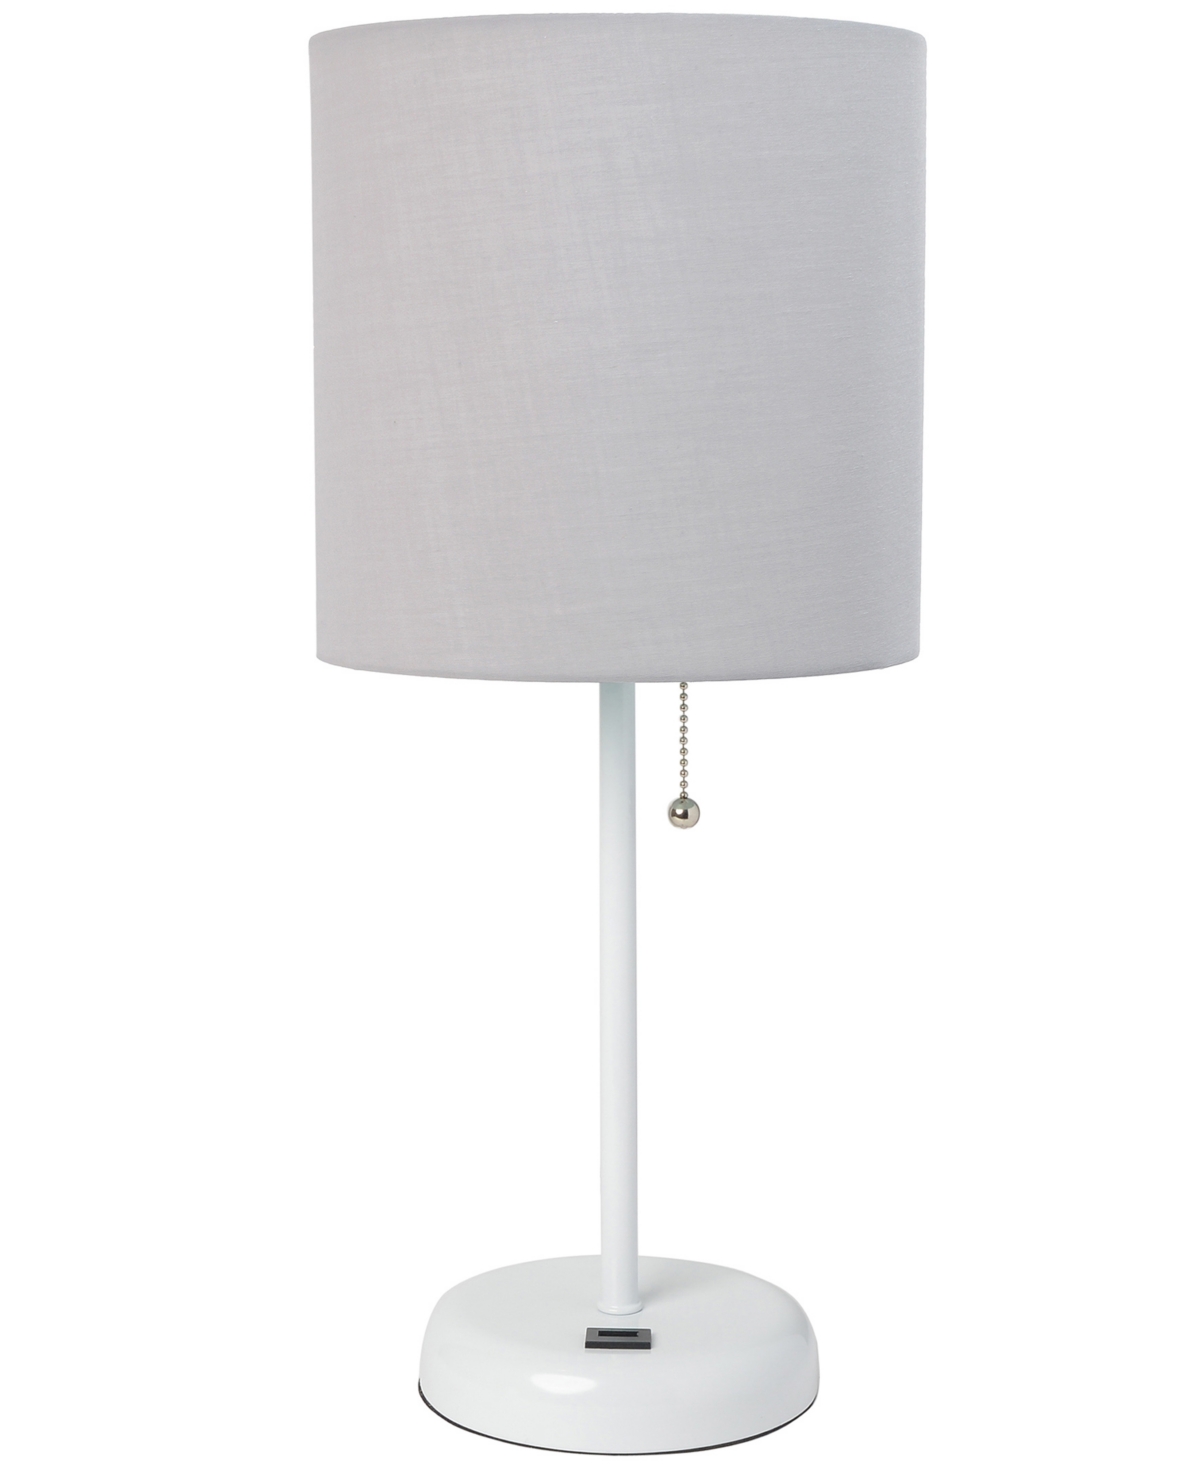 Shop Creekwood Home Oslo 19.5" Contemporary Bedside Usb Port Feature Standard Metal Table Desk Lamp In White Gray